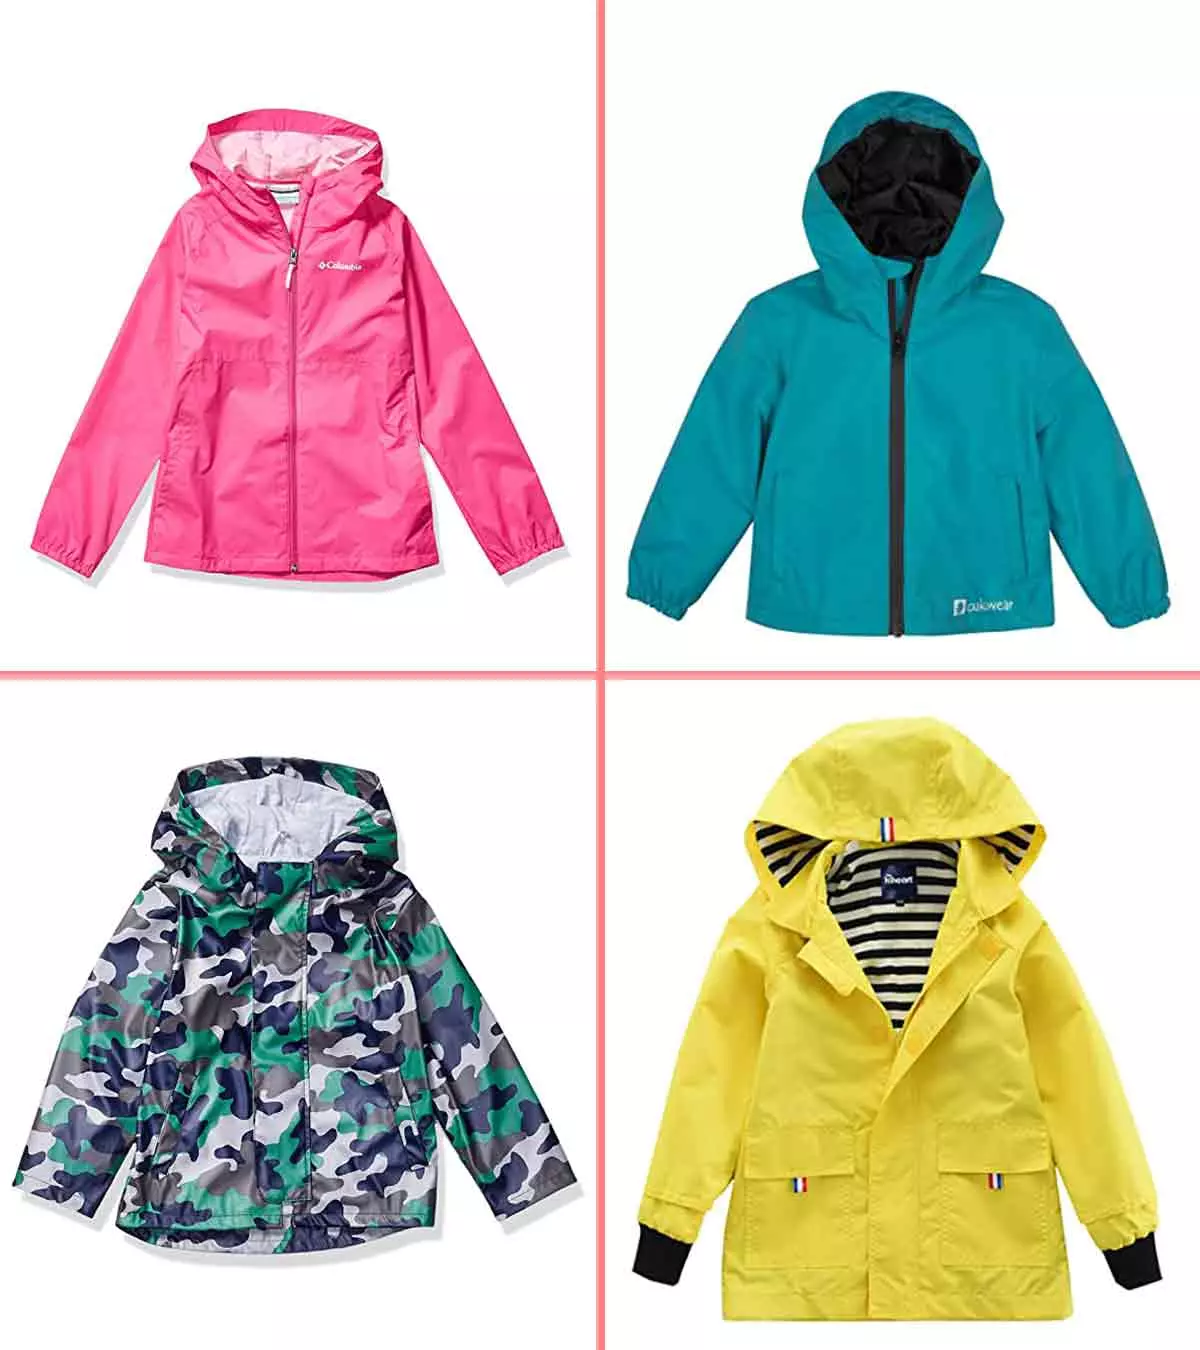 15 Best Raincoats For Kids Of 2020